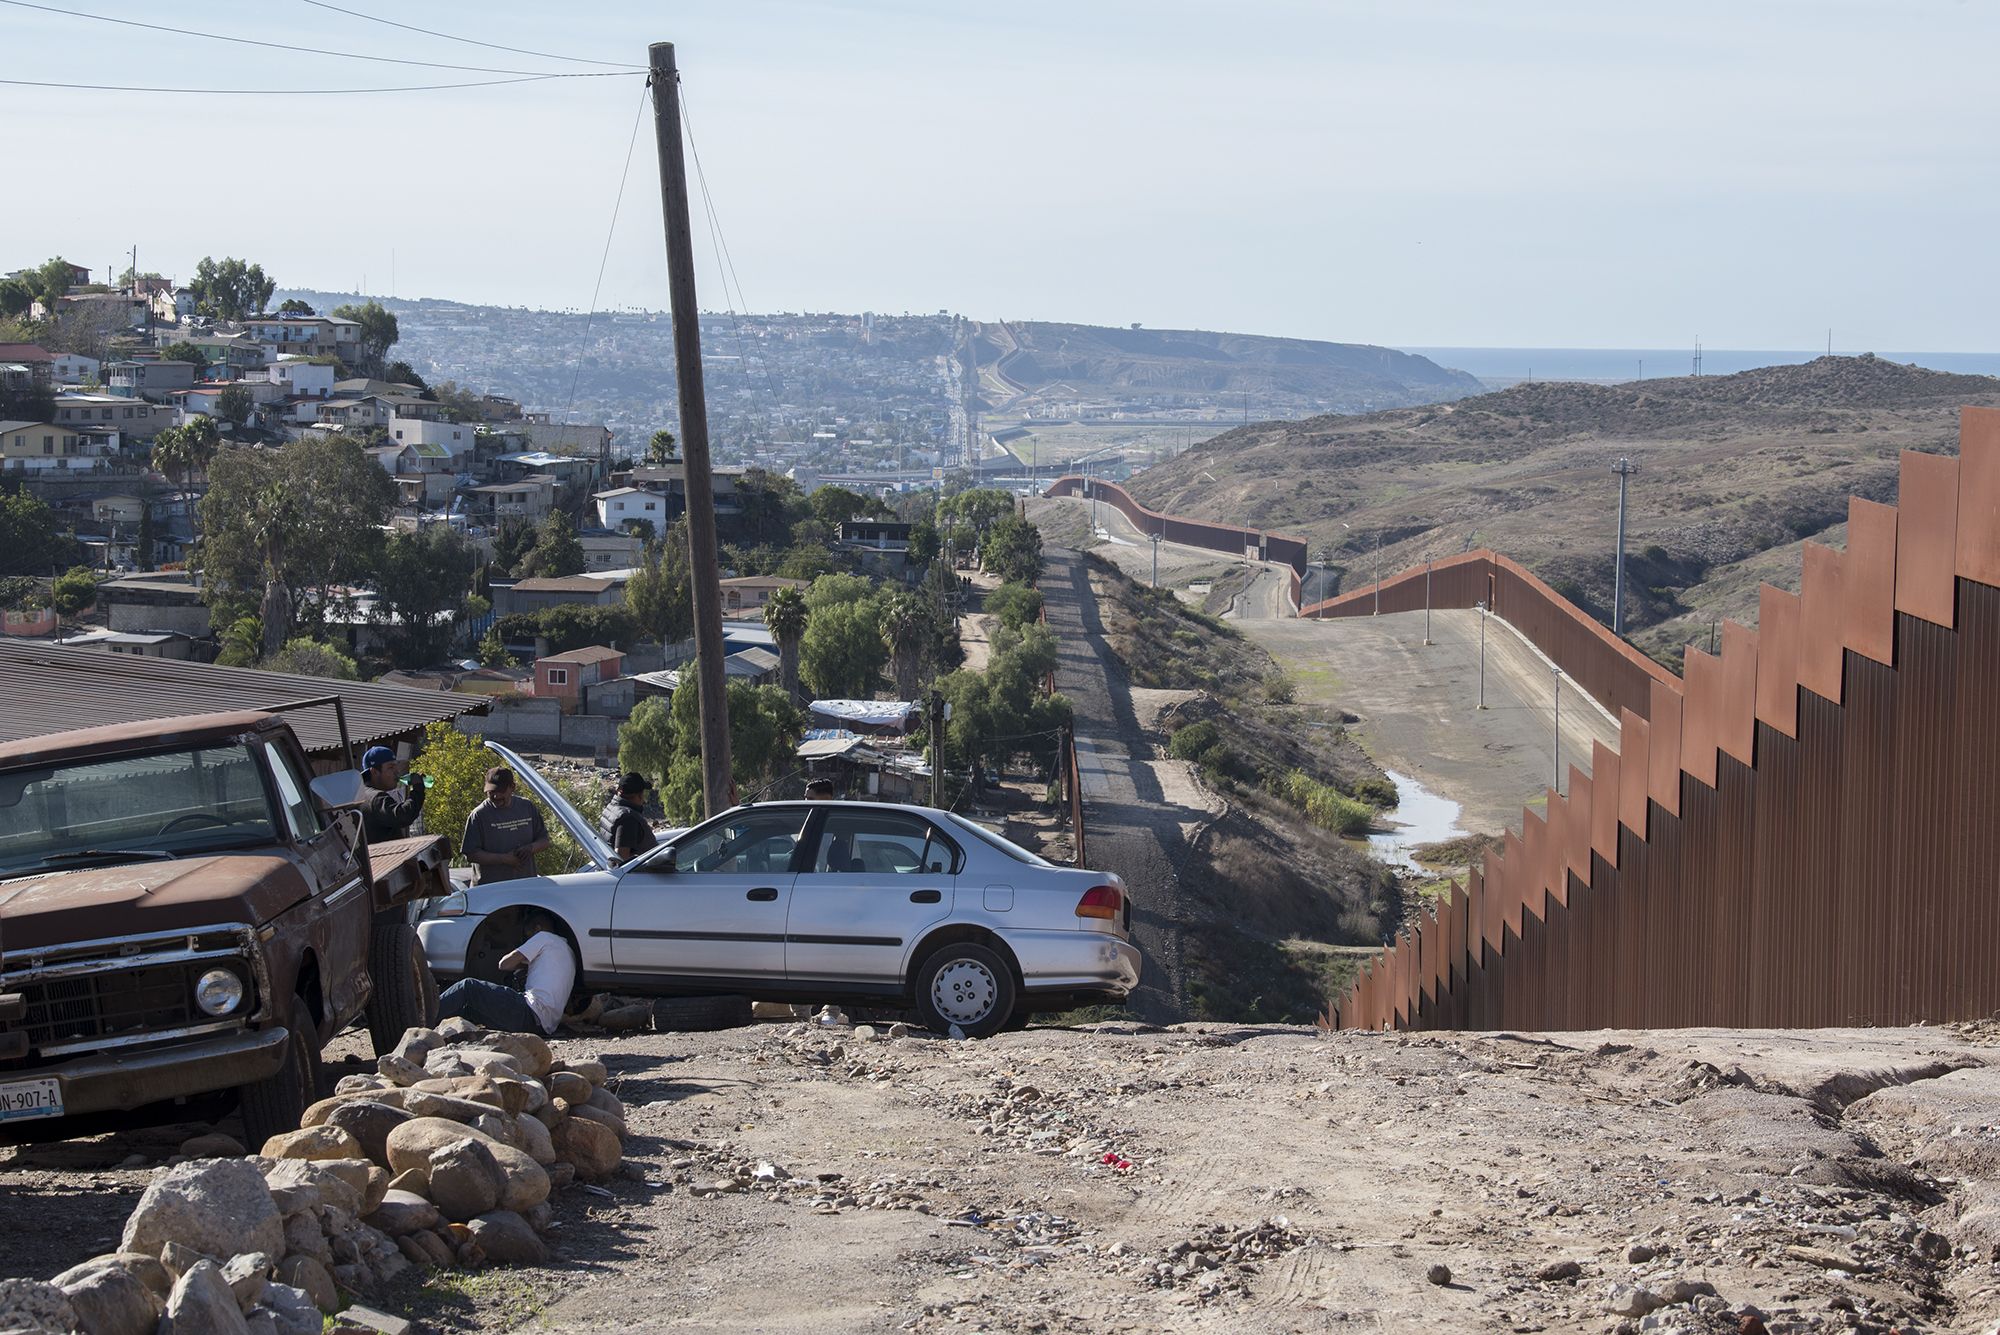 Men gather to fix a car in the Libertad Parte Alta neighborhood of Tijuana, Mexico, left, as the border wall stretches on for miles nearby. Image by Amanda Cowan. Mexico, 2019.